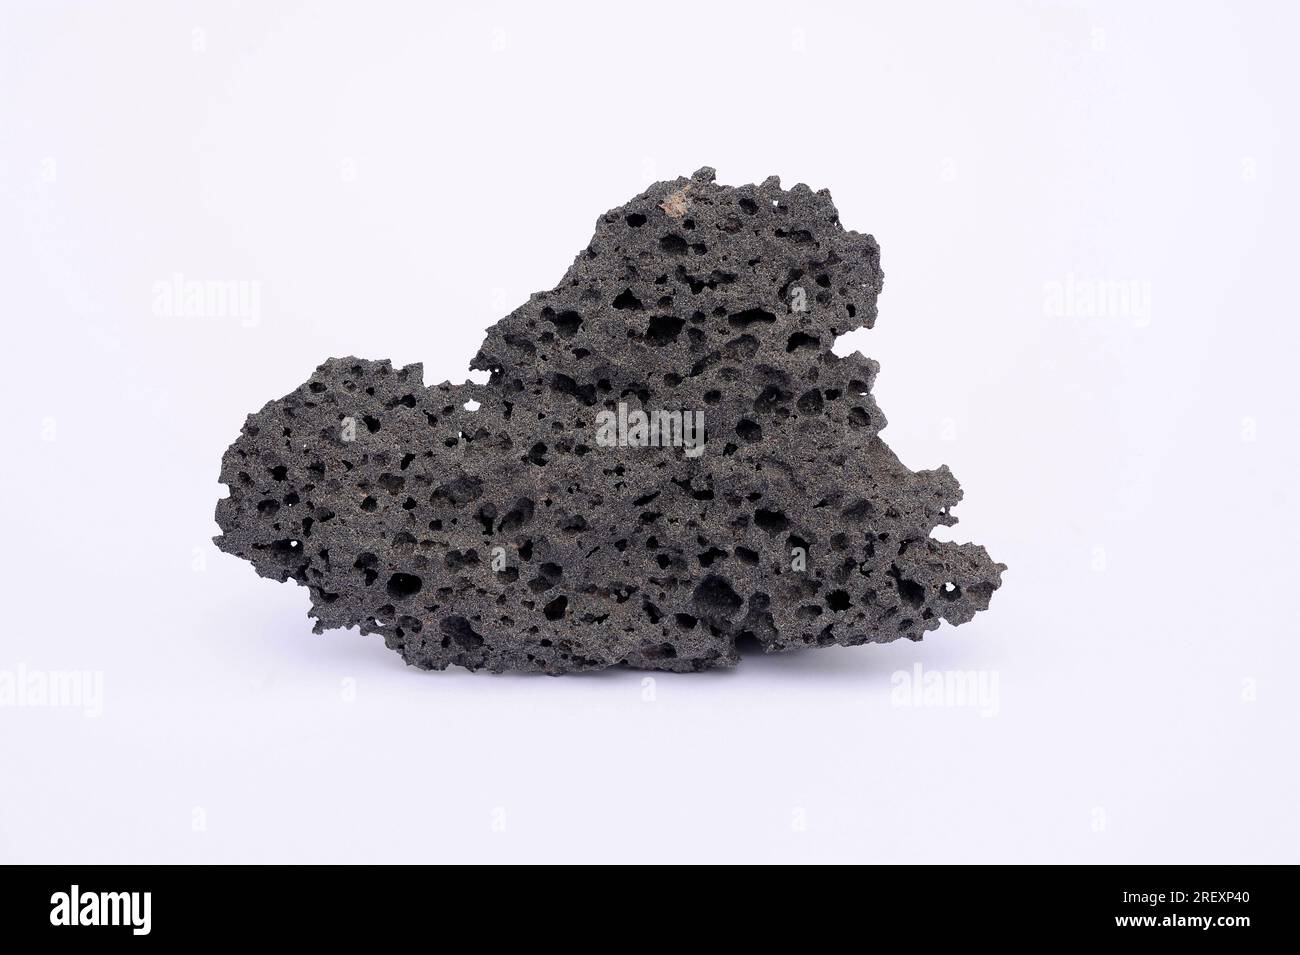 Vesicular basalt. Basalt is a volcanic or extrusive igneous rock. This sample comes from Lanzarote Island, Canary Islands, Spain. Stock Photo